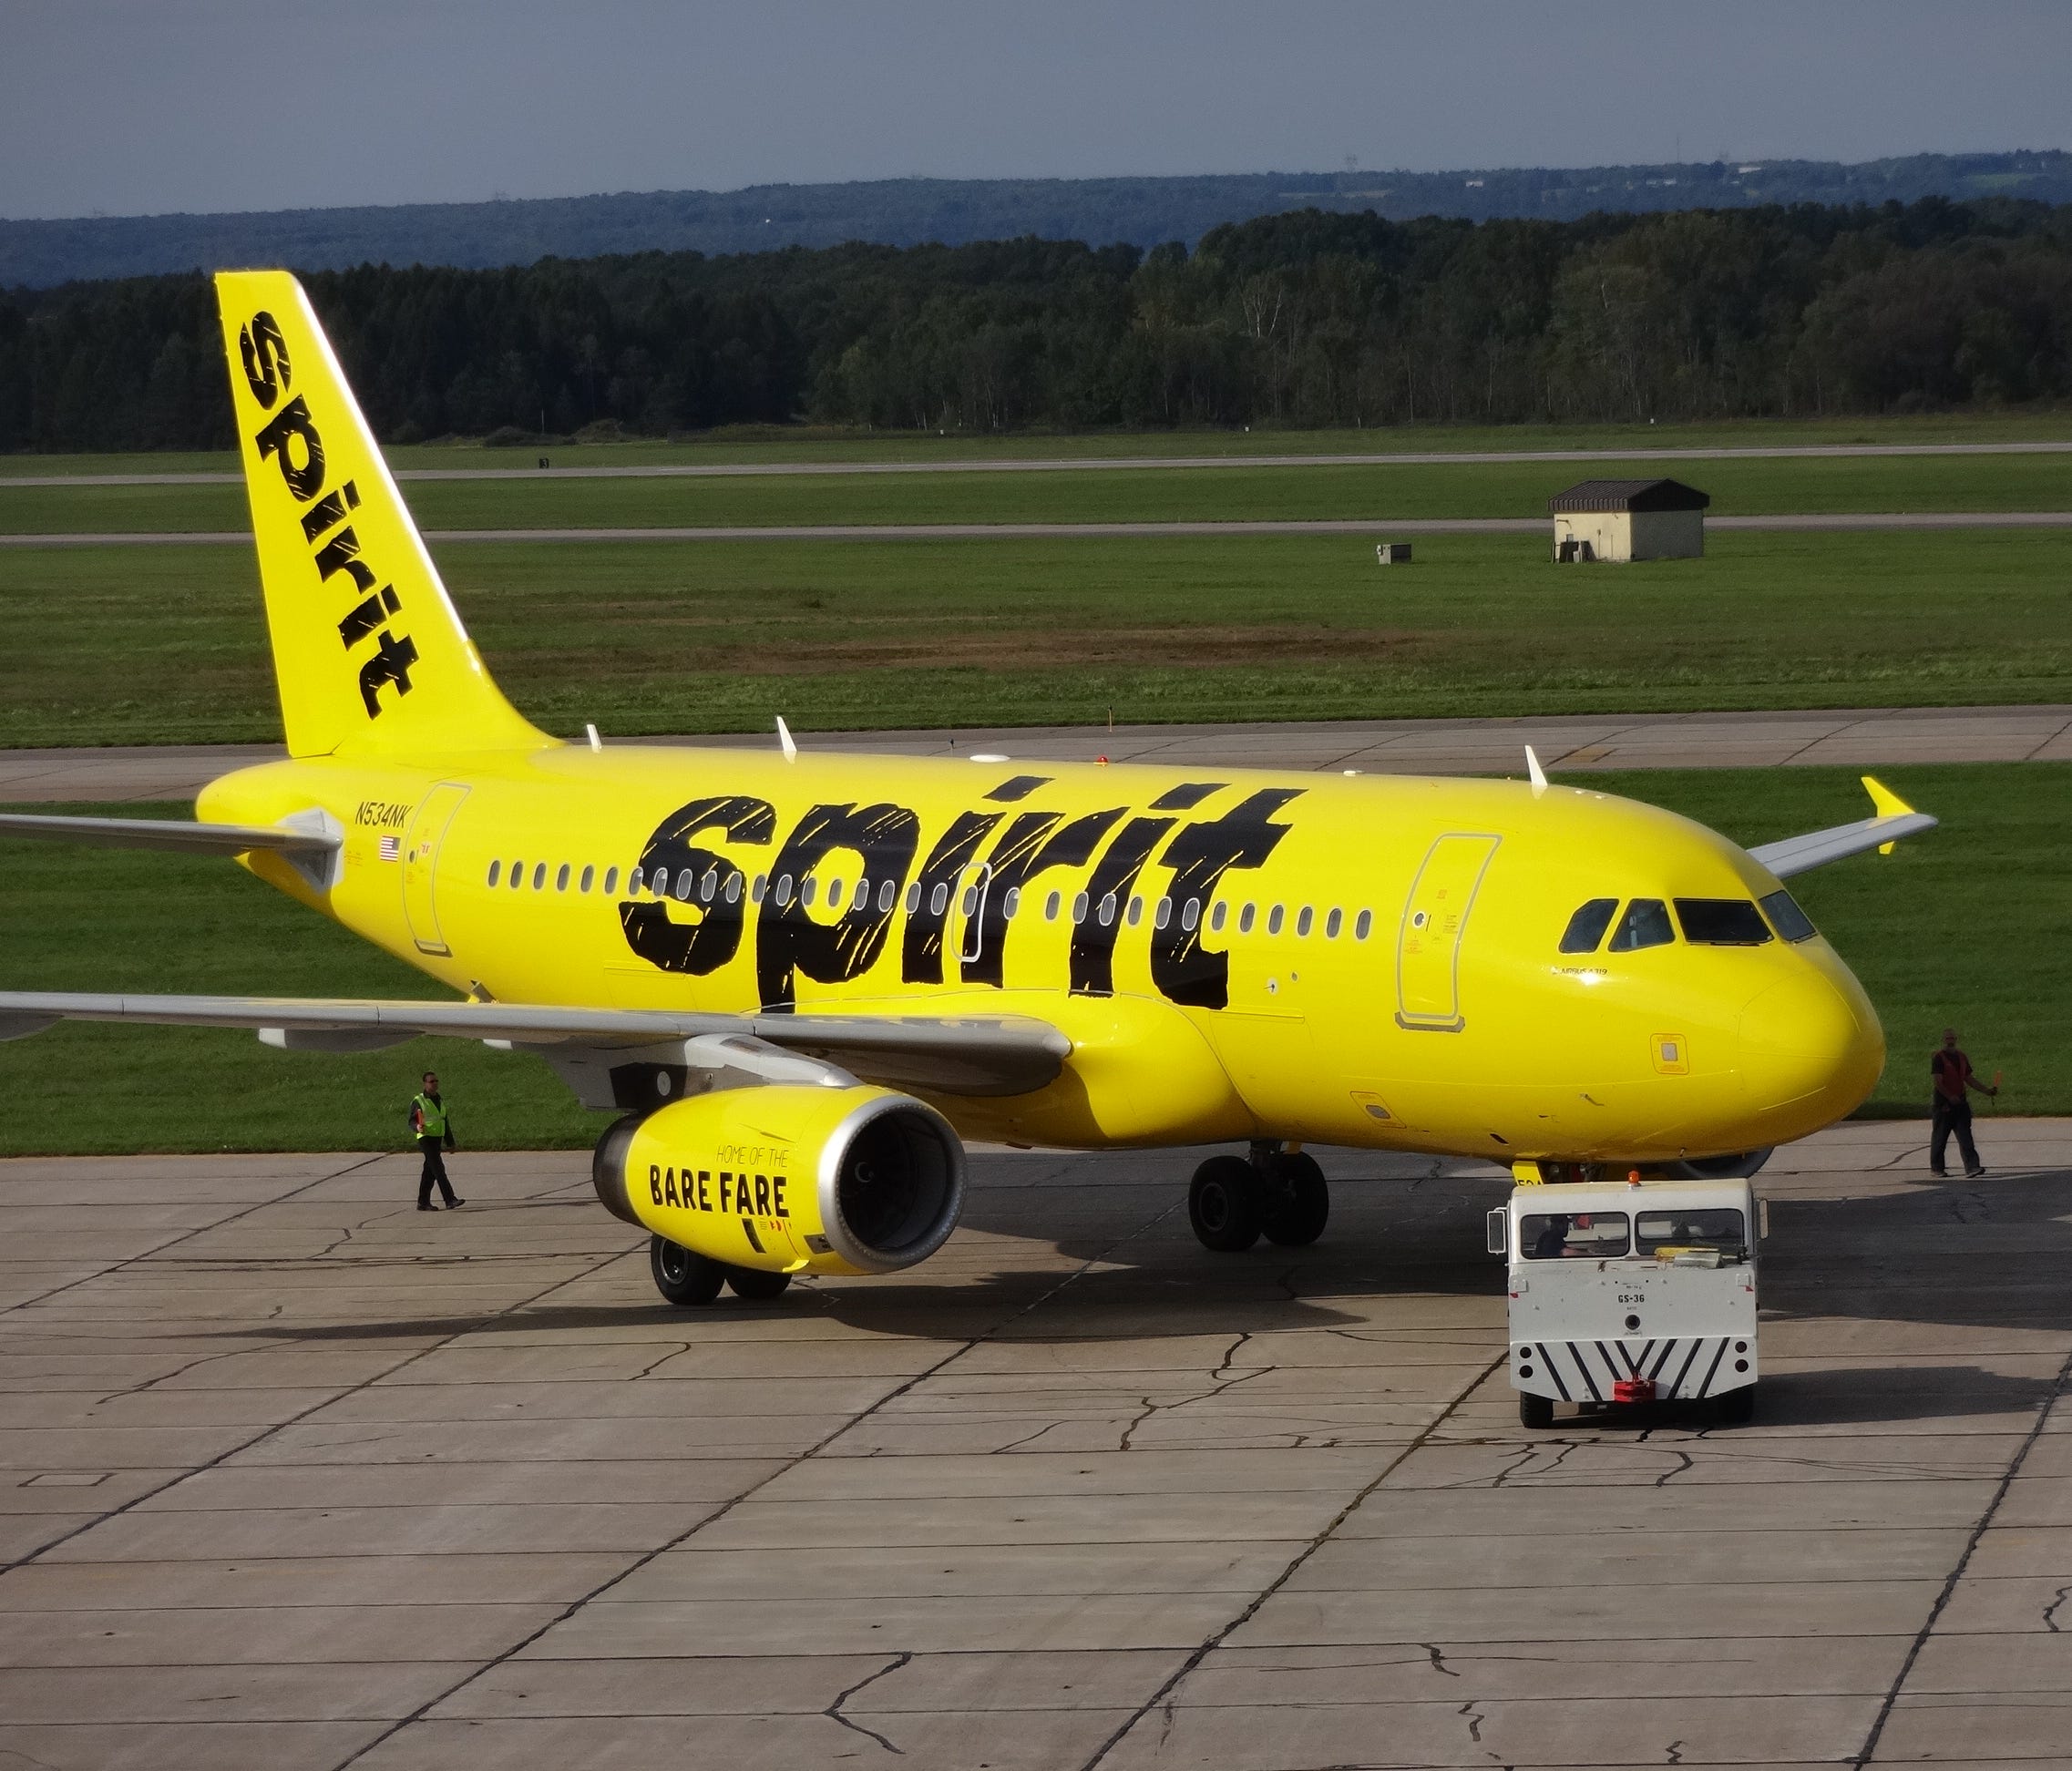 Spirit Airlines shows off its new paint scheme at an aircraft paint facility in Rome, N.Y., on Sept. 15, 2014.